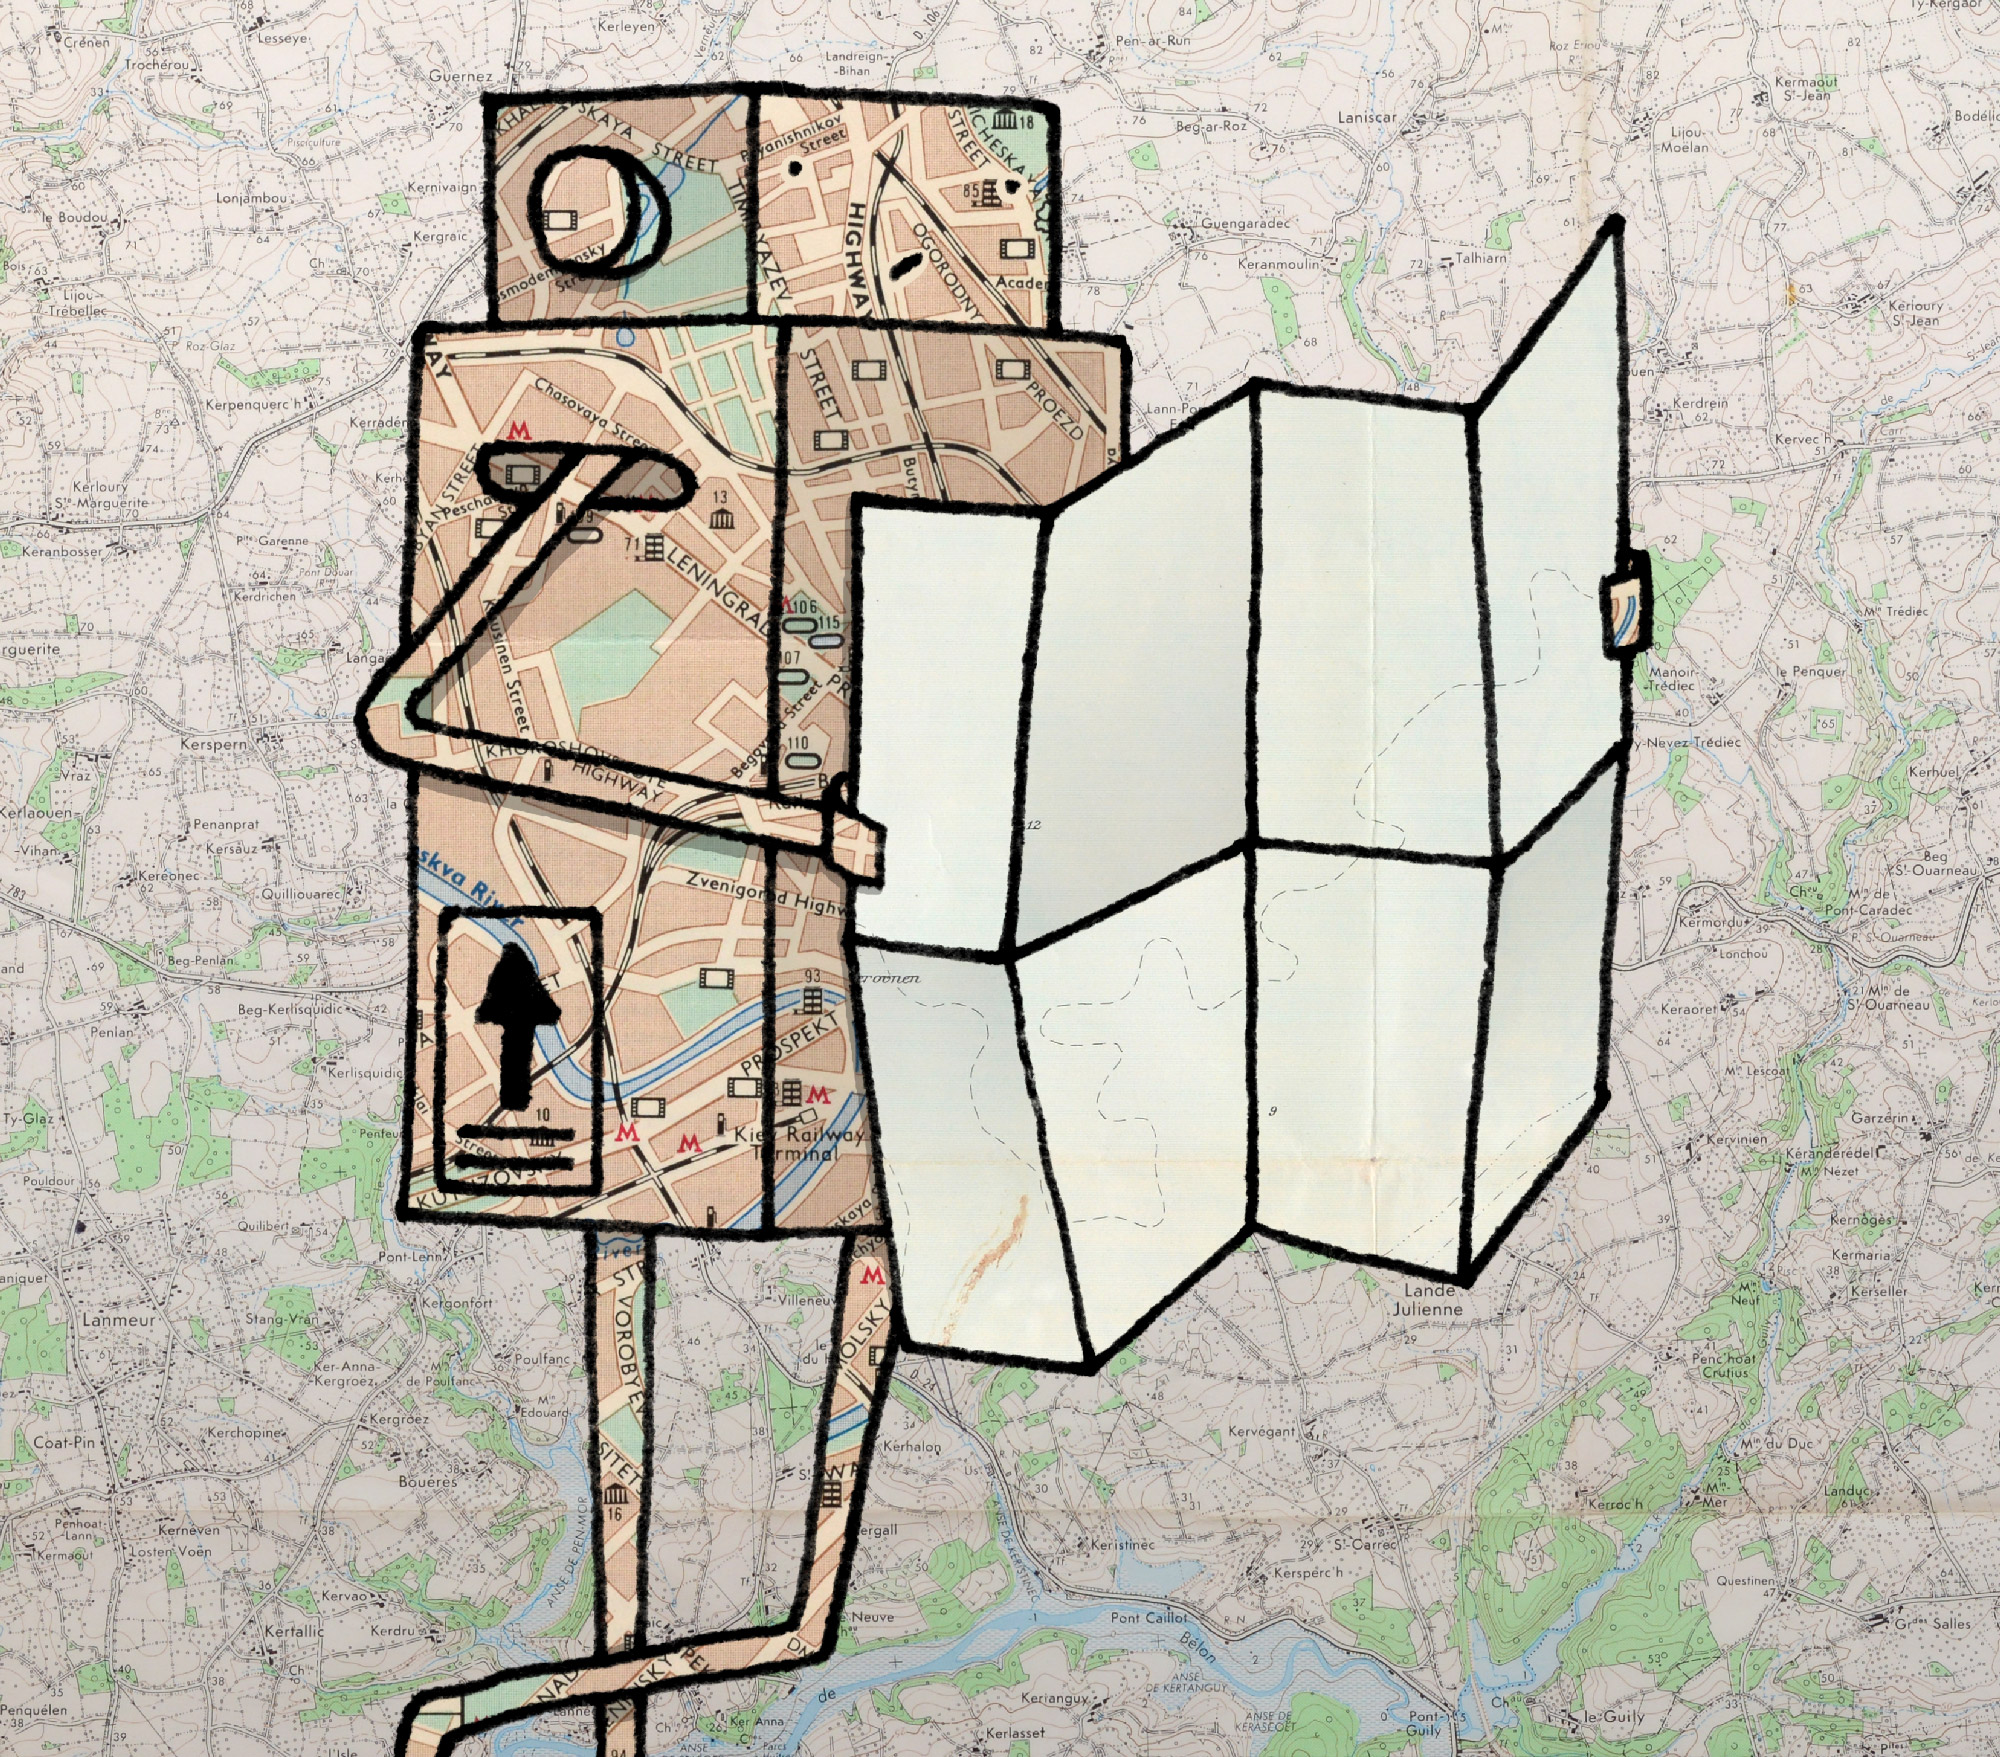 An illustration of a lost robot attempting to look at a paper map